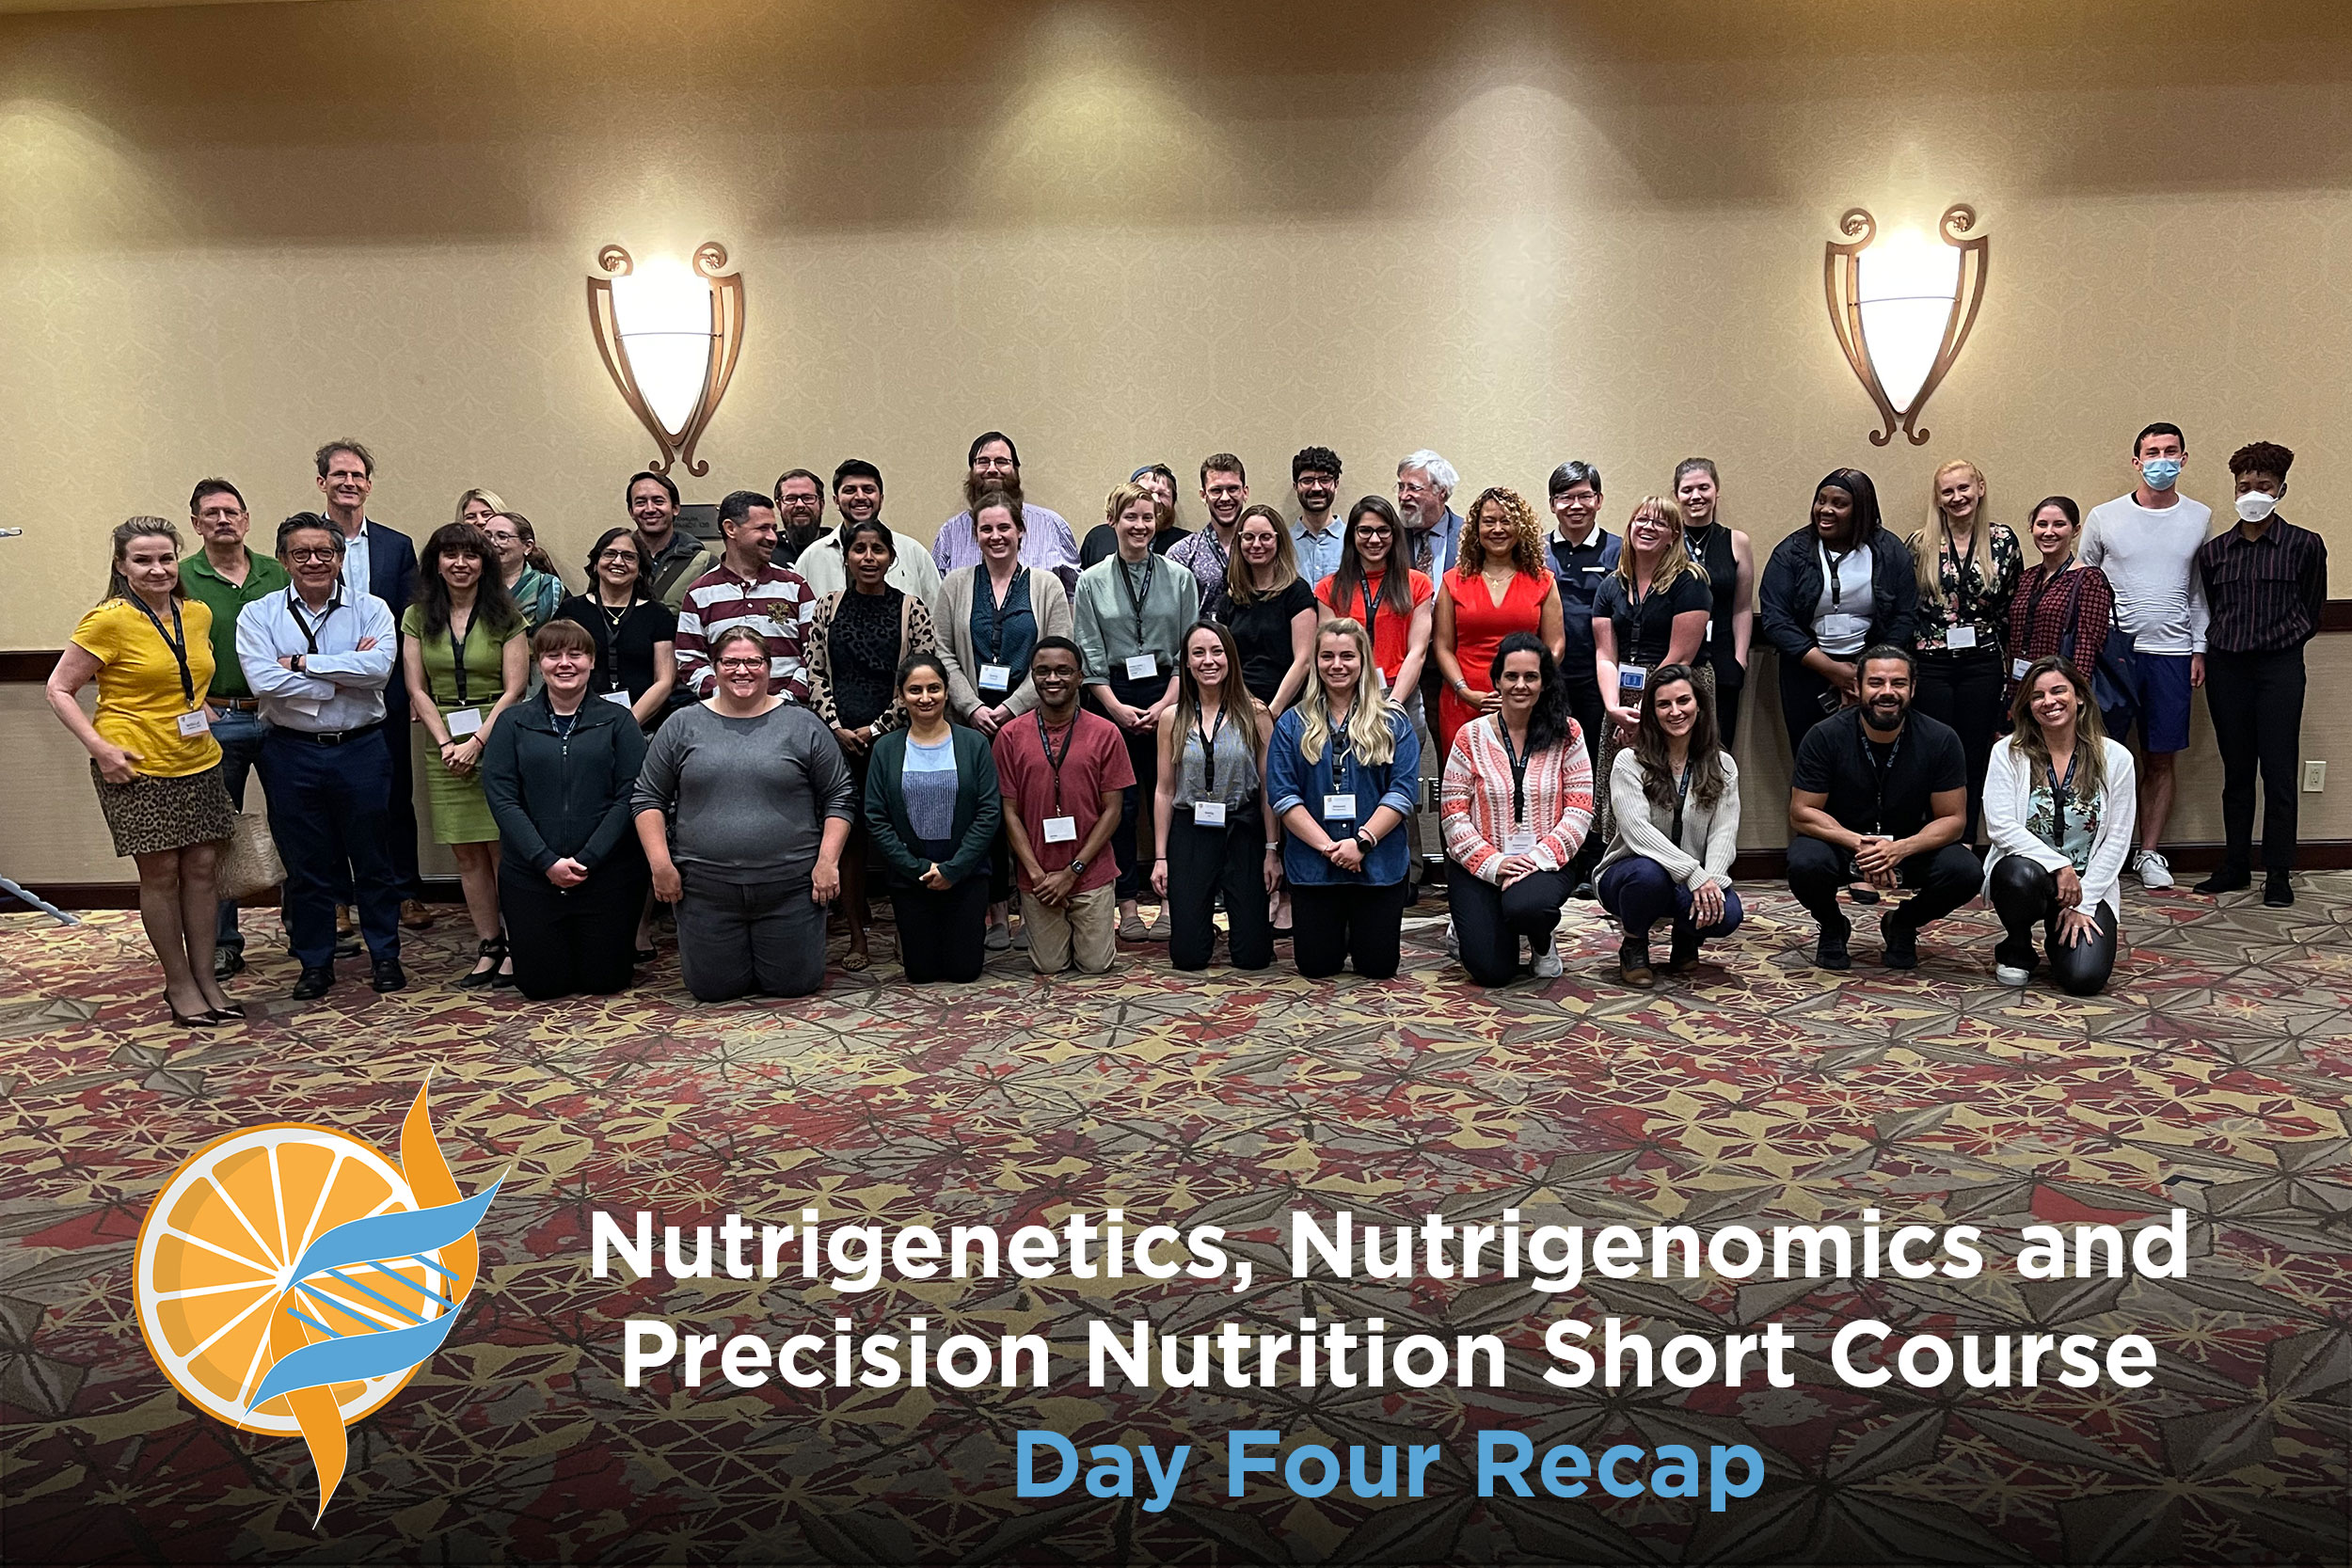 NGx: A short course in Nutrigenetics, Nutrigenomics and Precision Nutrition – Day Four